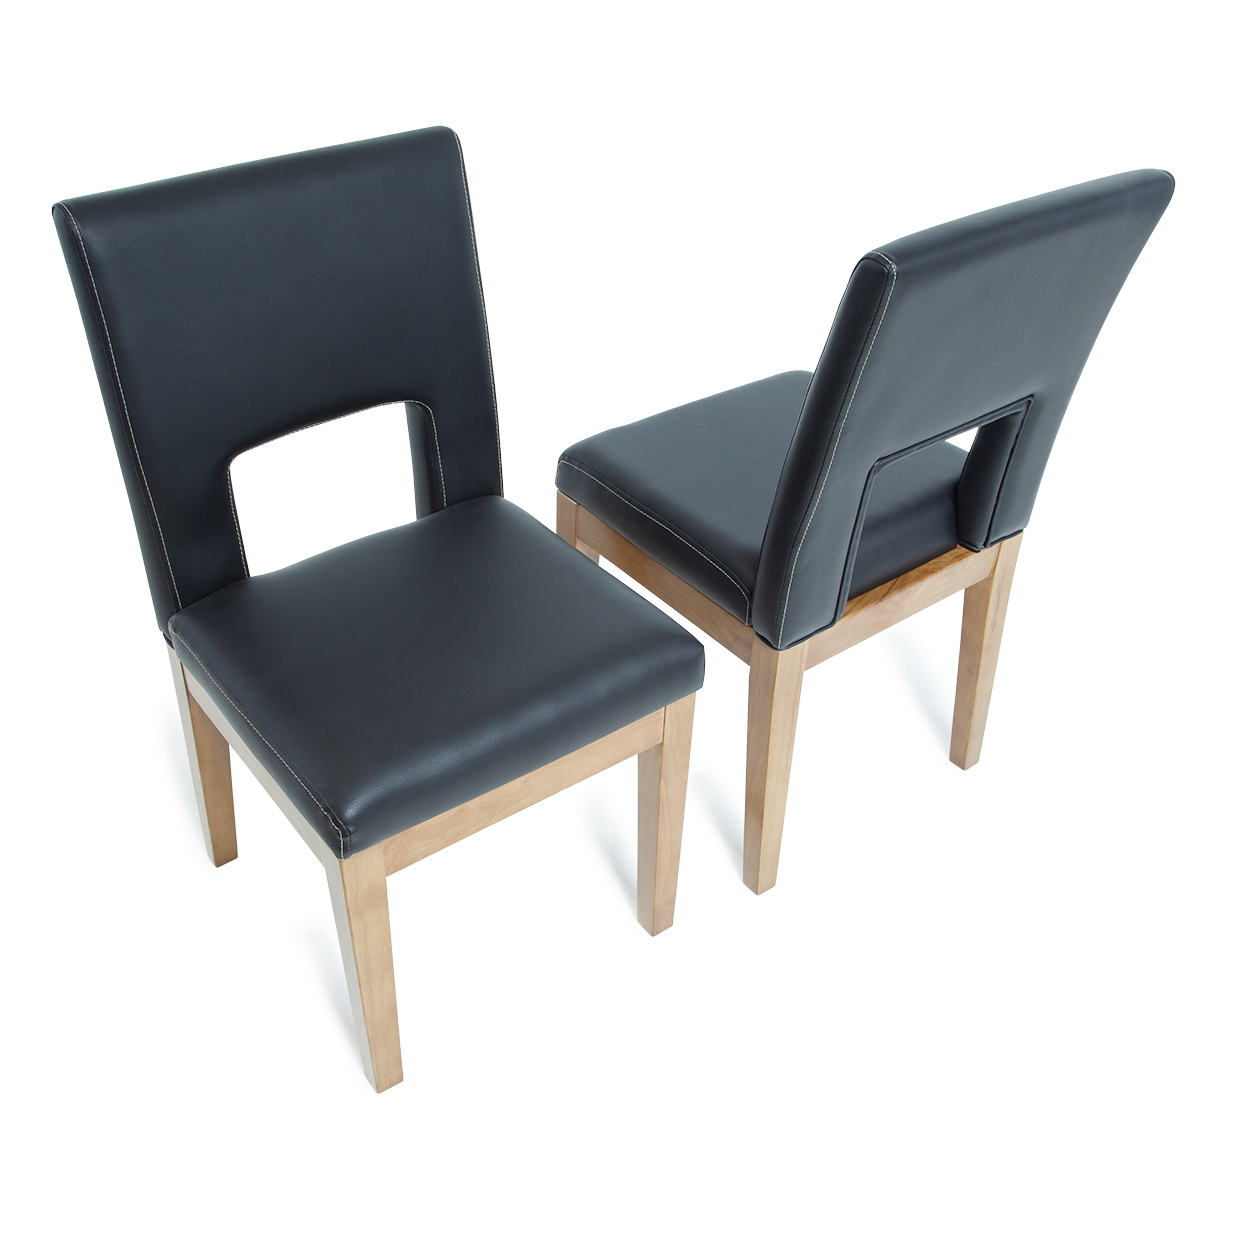 BBO Poker Tables "Set of 2" Helmsley Chairs